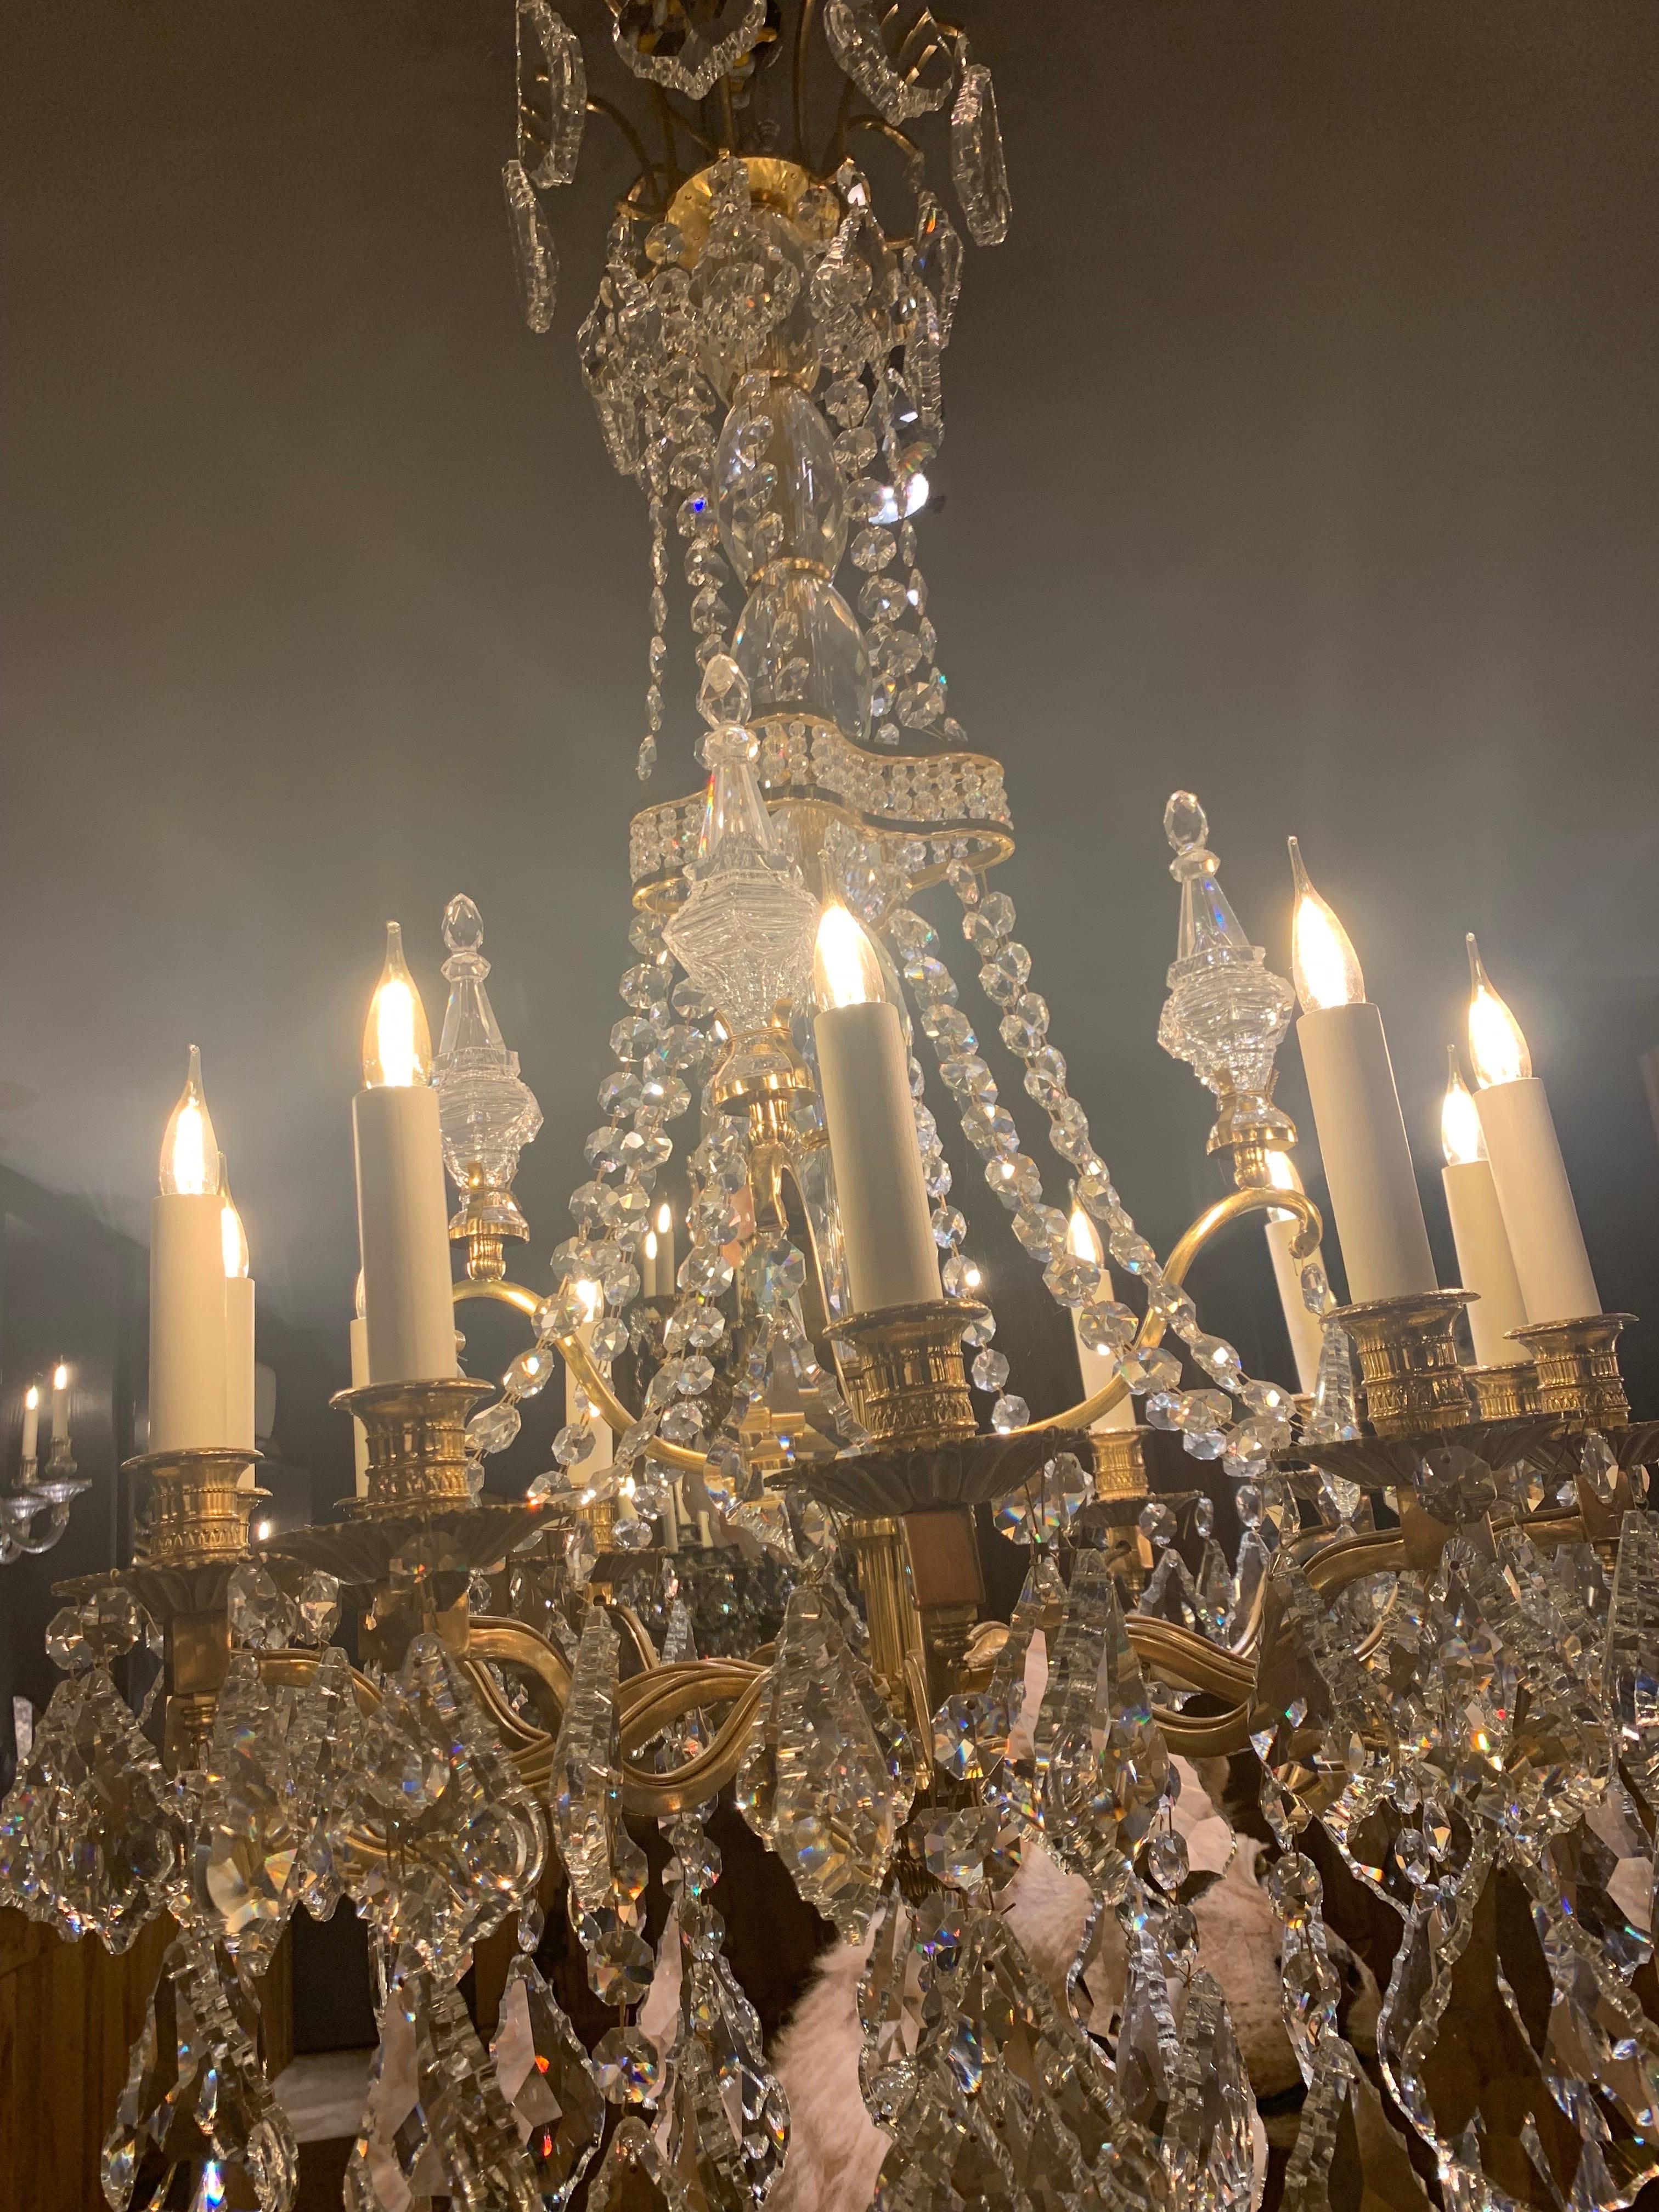 Magnificent gallery chandelier of style louis XIV with 12 arms of lights in gilded bronze 18 carats. 
The chandelier is decorated with crystal pendants and cut crystal pieces.

We have one chandelier in stock however we can produce them made to